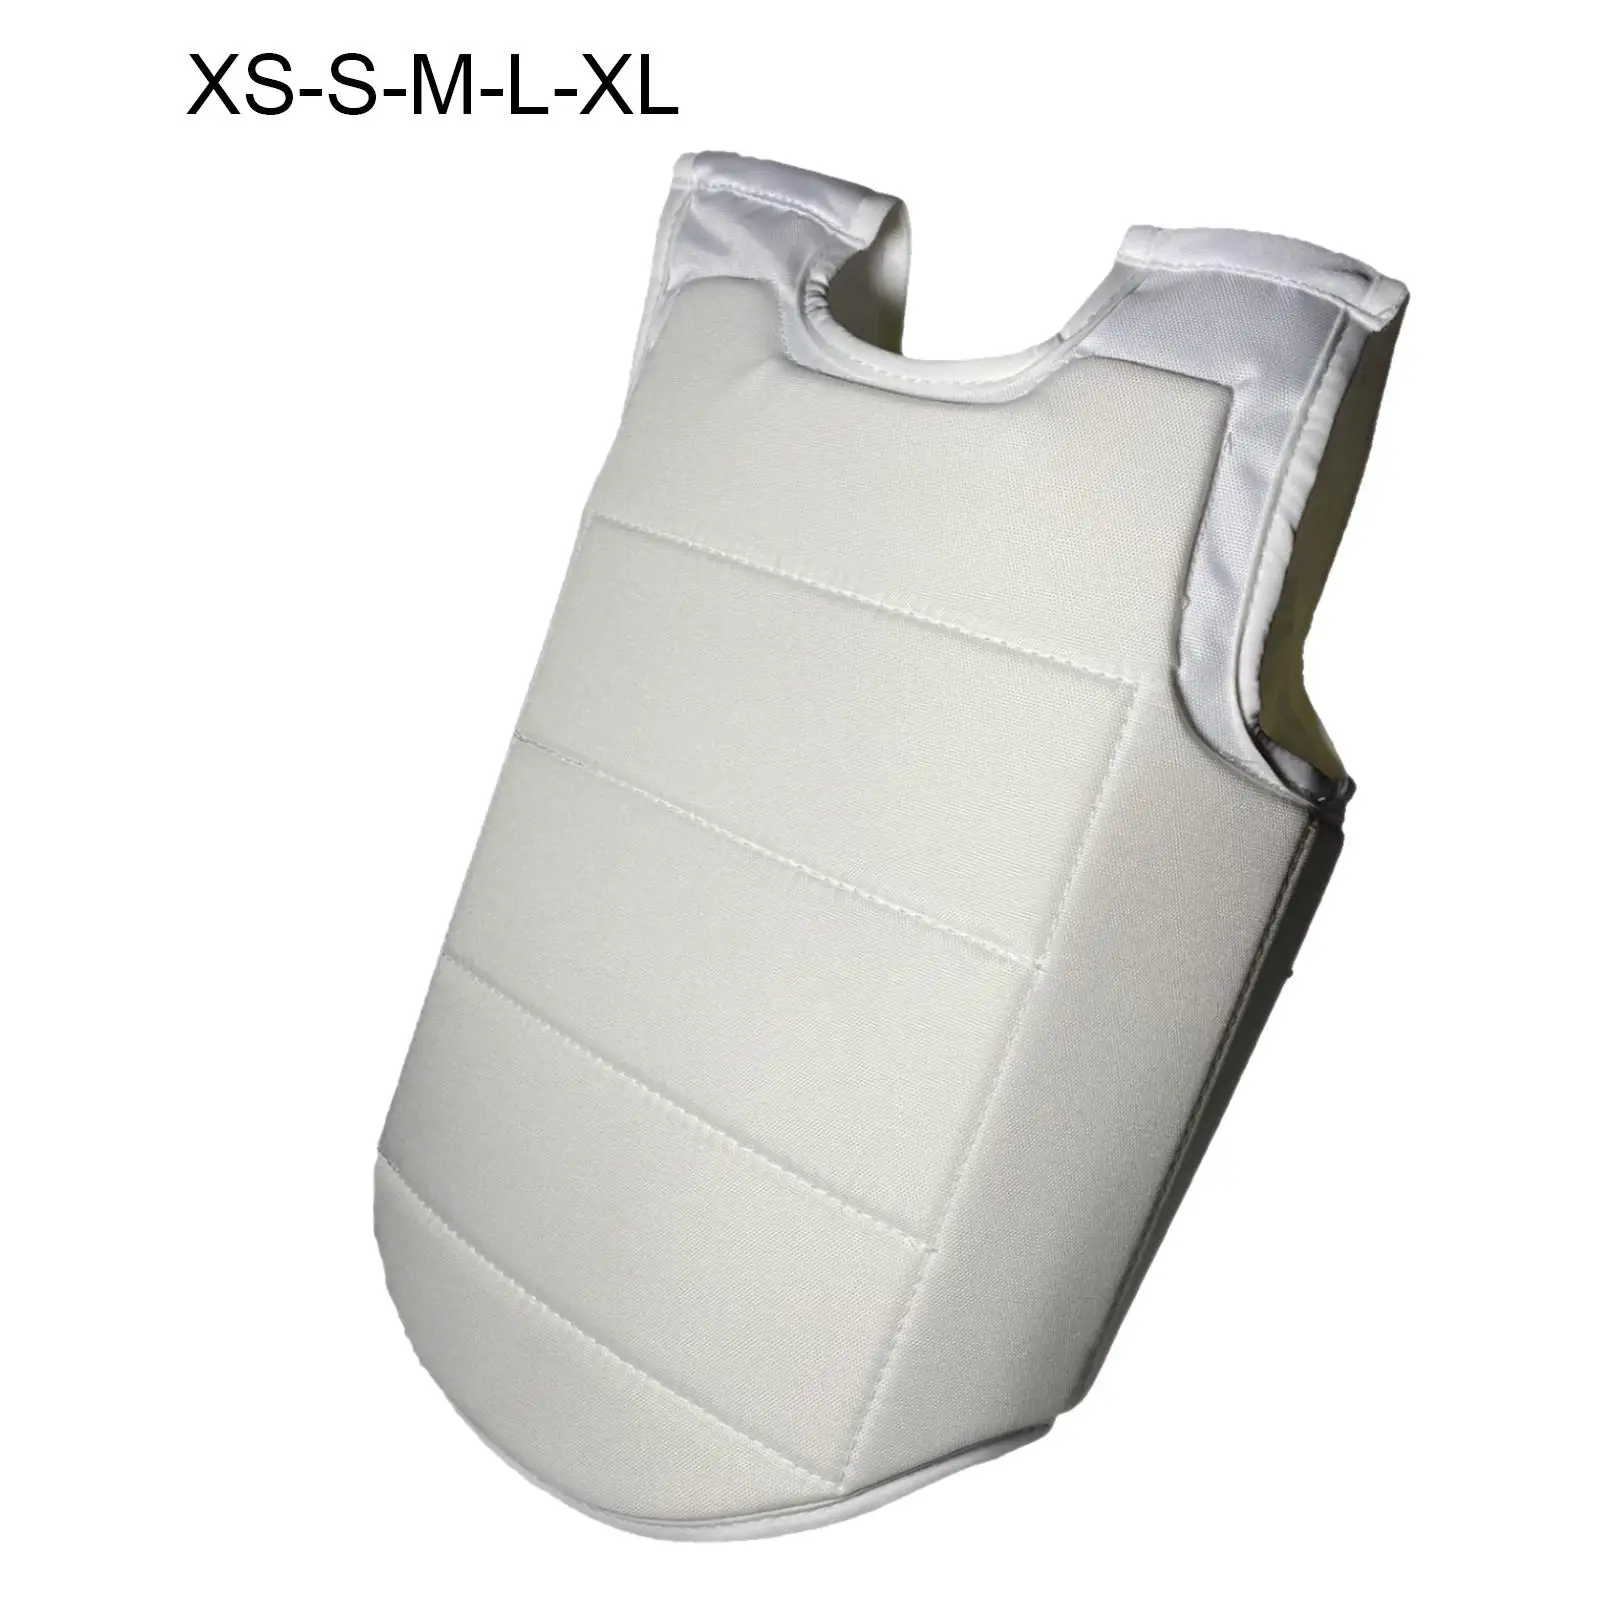 Karate Chest Protector Chest Guard Muay Thai Rib Shield Vest Body Protection for Youth Adult Kids Training Boxing Martial Arts